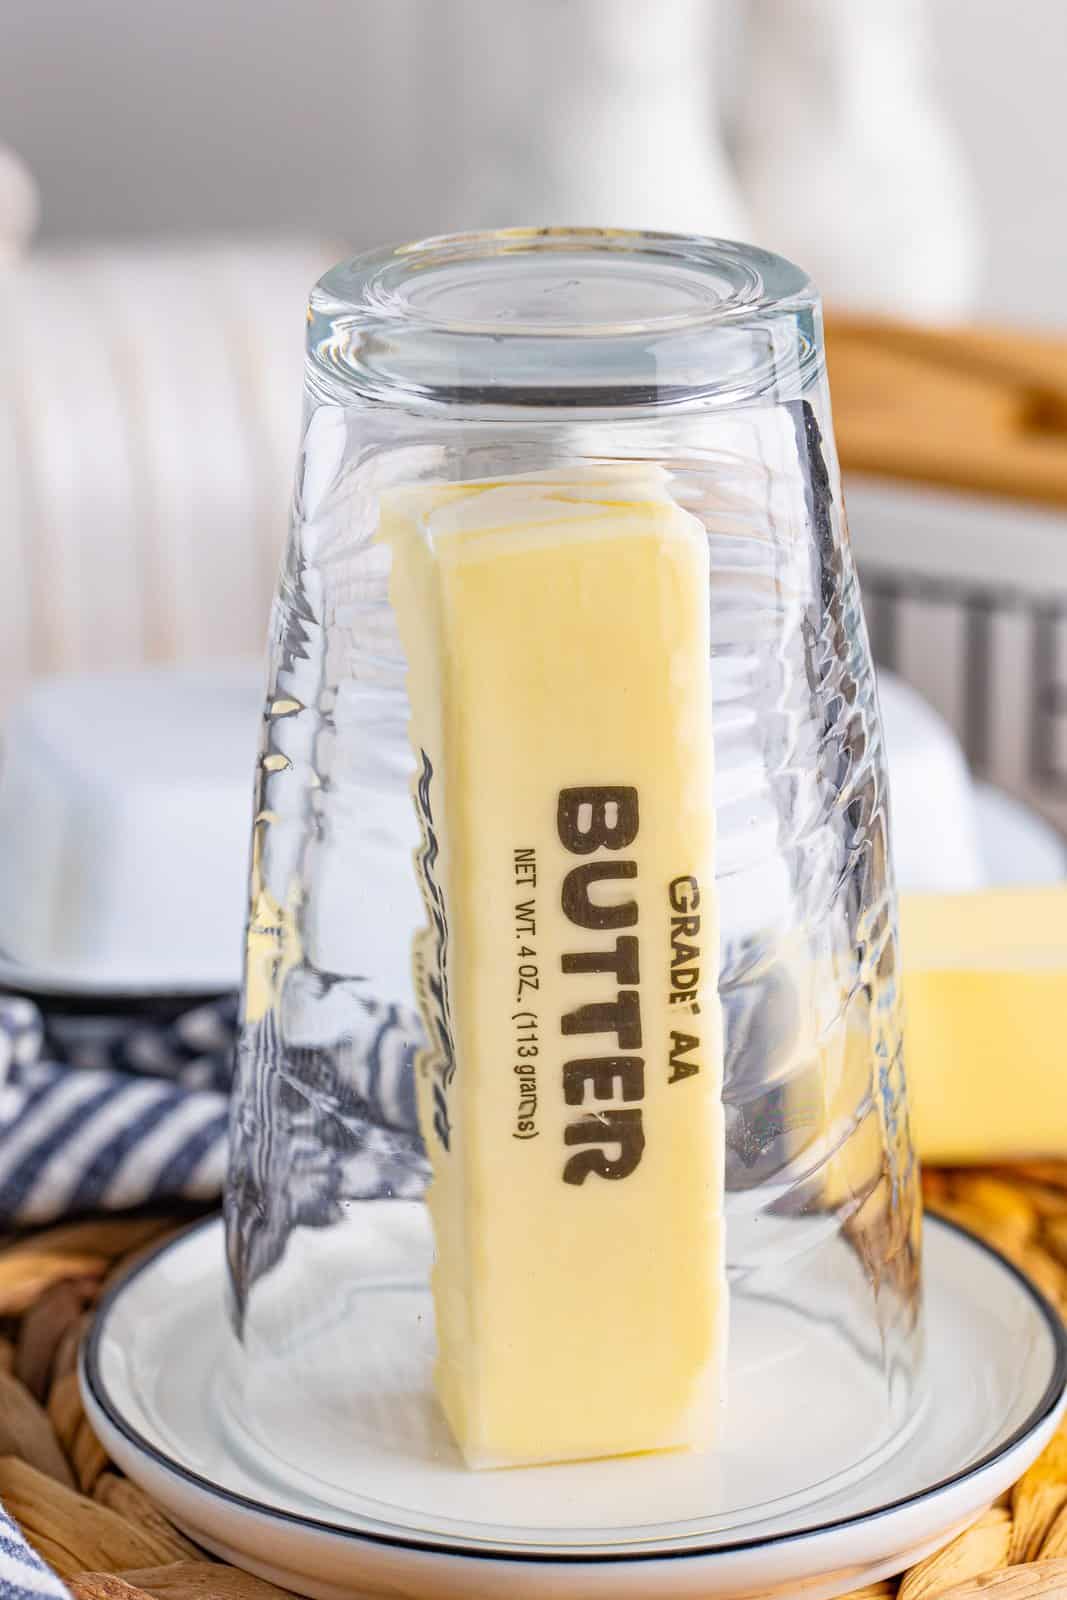 A glass over a stick of butter on a plate.